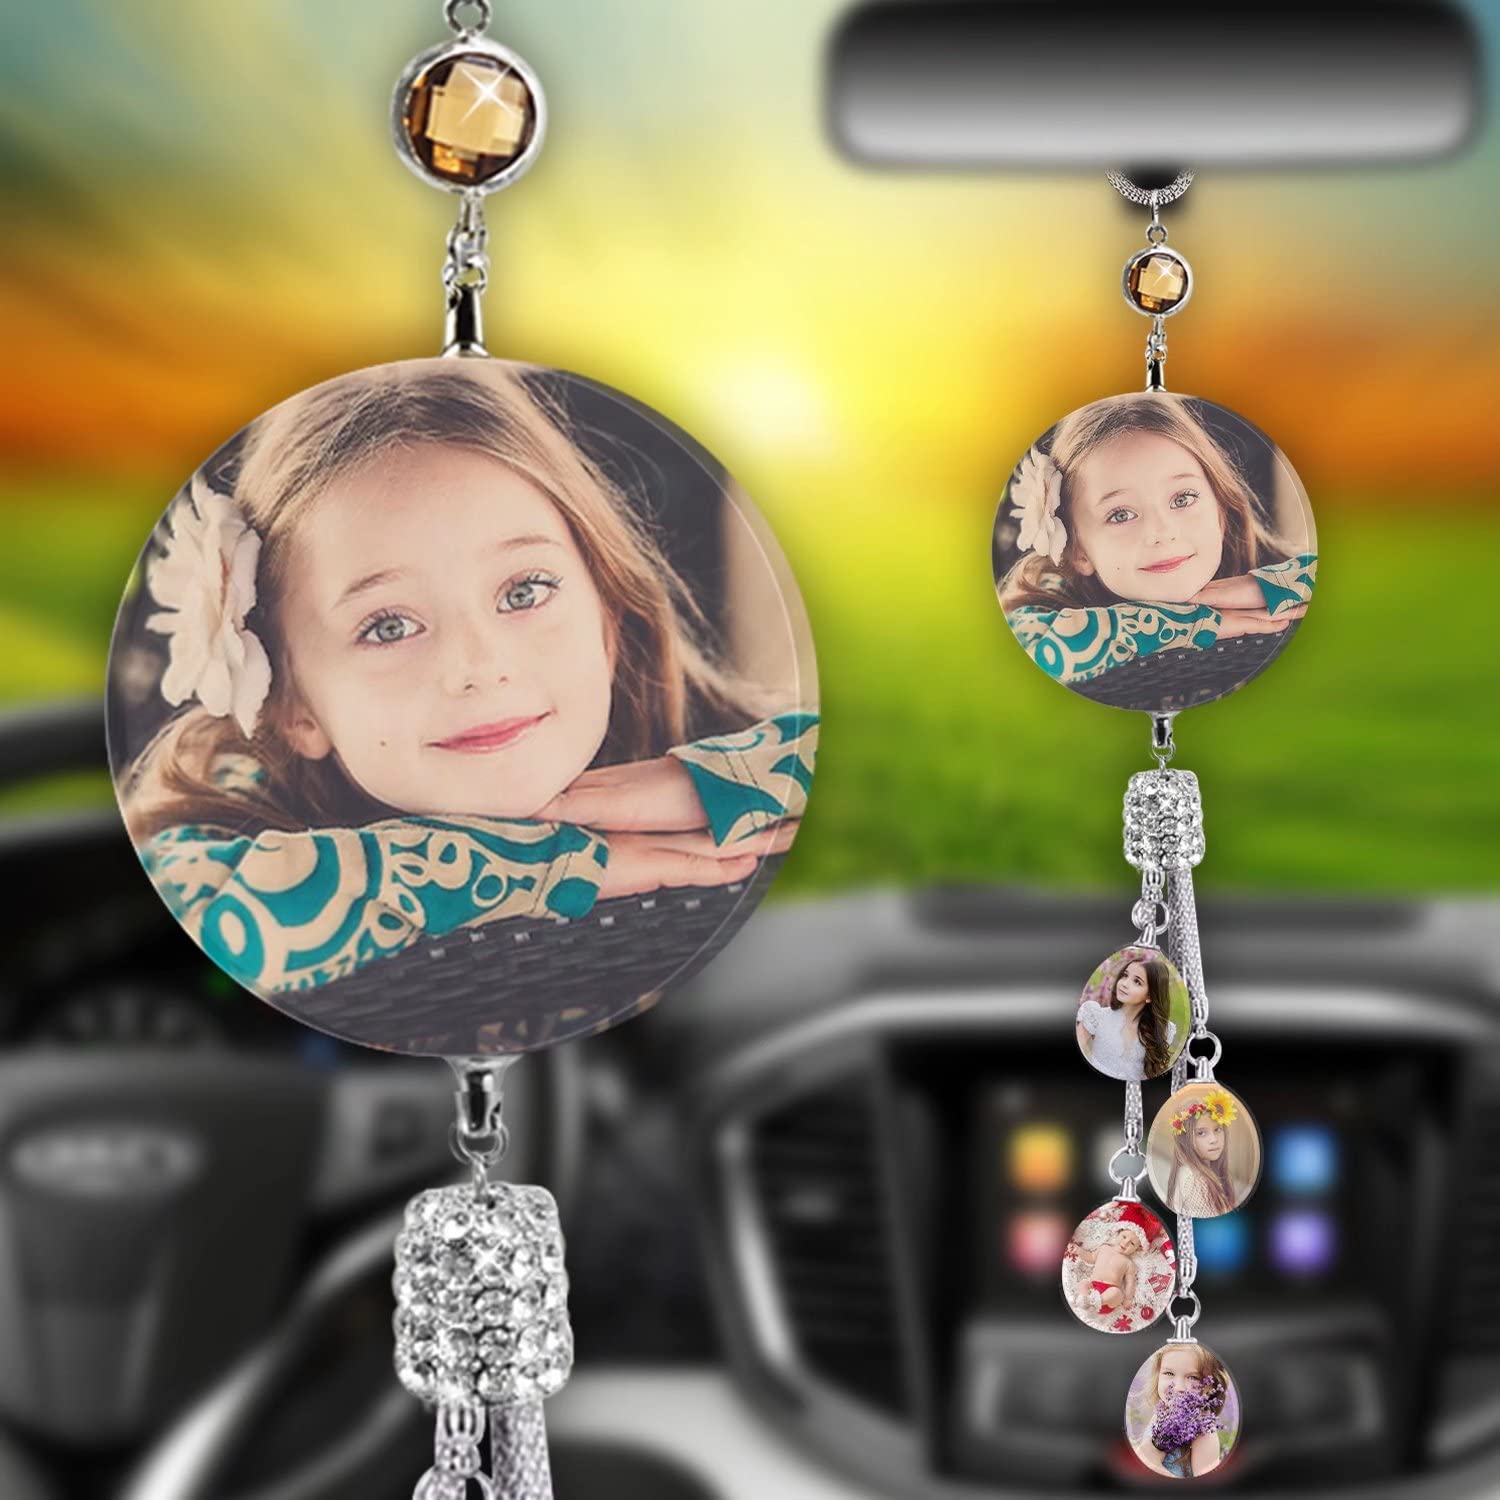 personalized ornament for rear view mirror